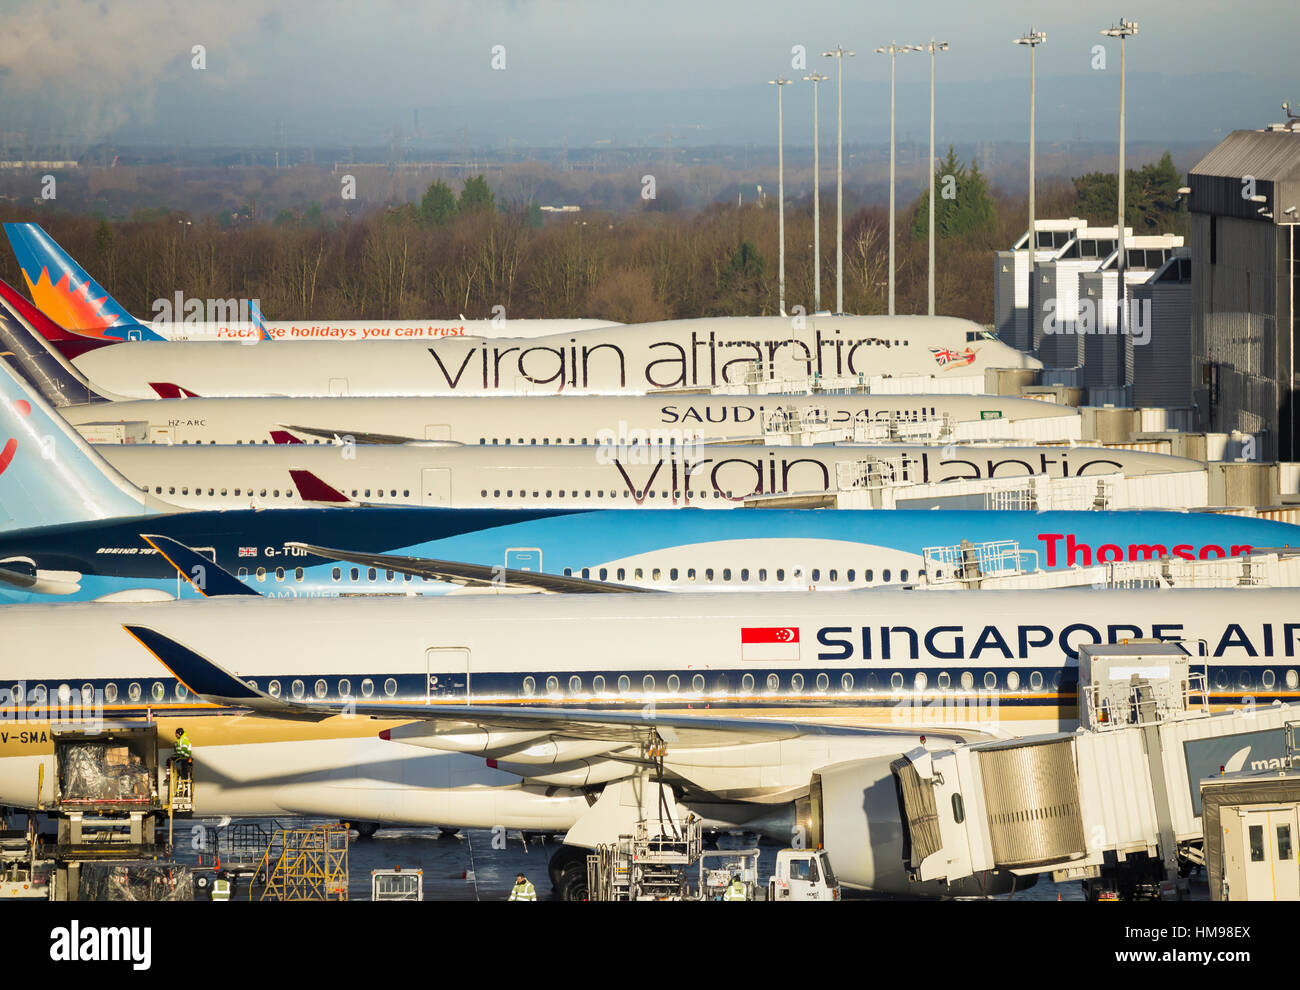 View over planes (including Virgin Atlantic, Singapore airlines, Thomson..) at Manchester Airport terminal 2. UK Stock Photo